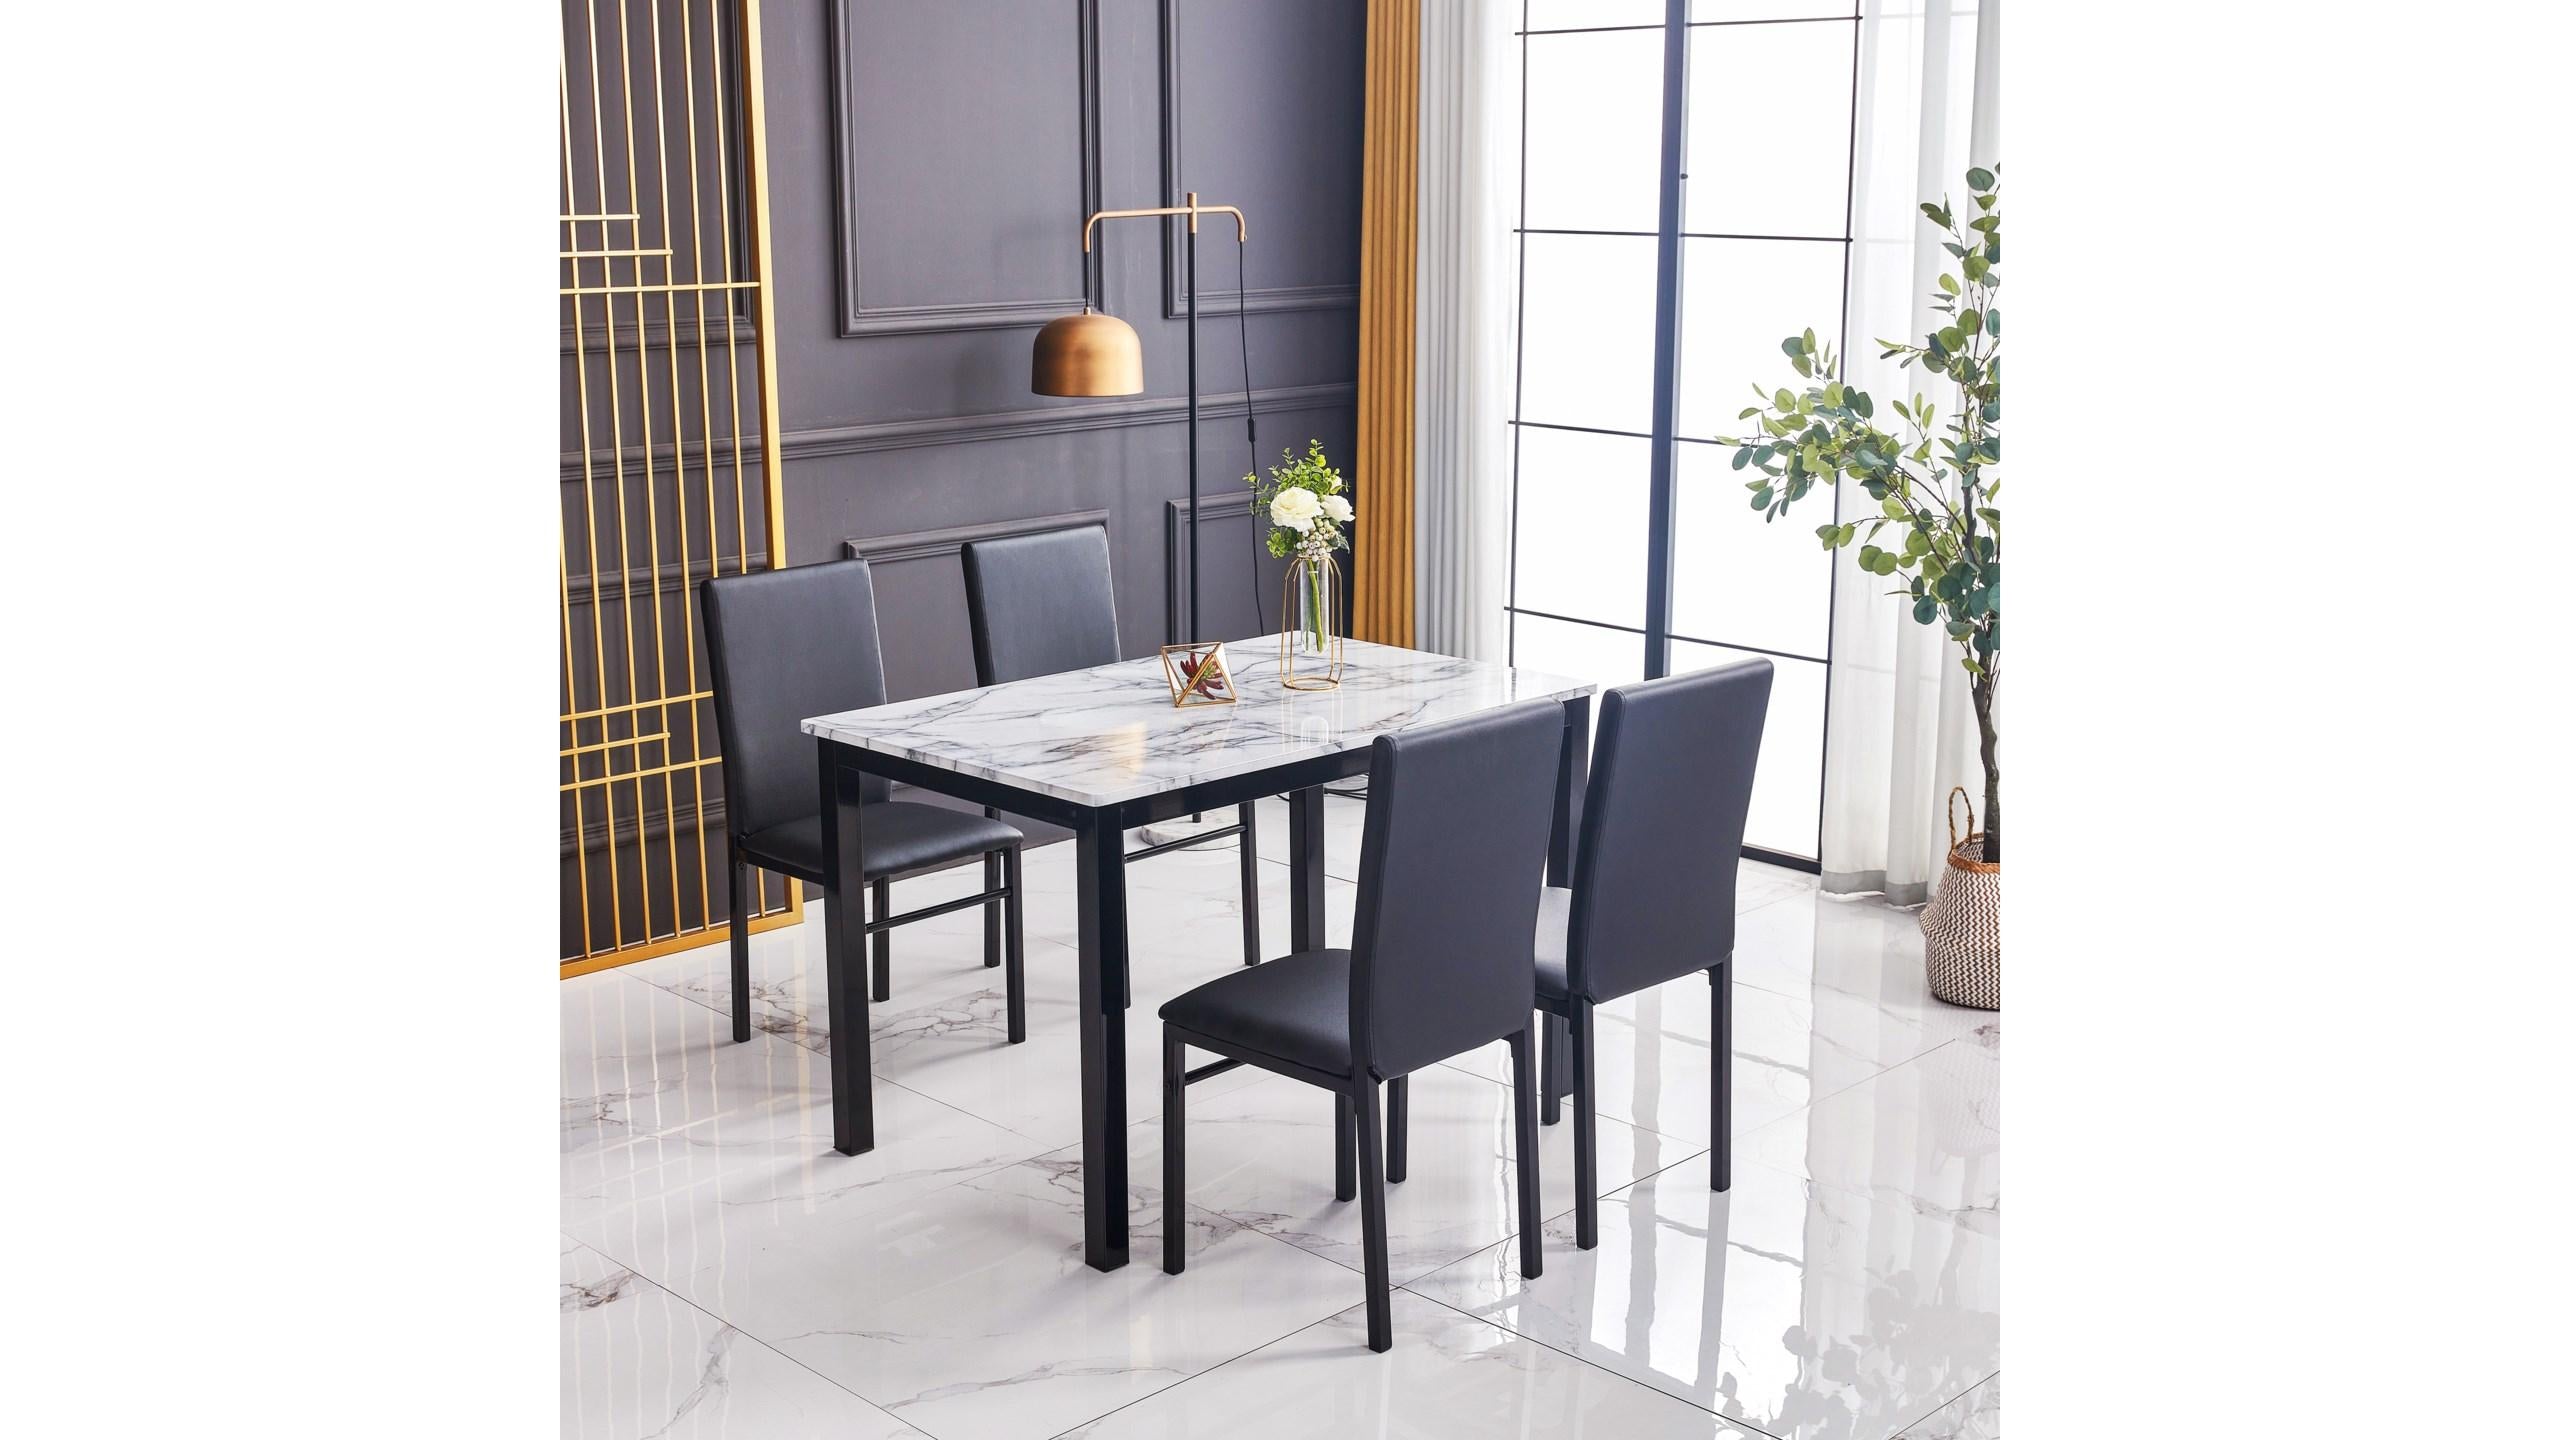 5 Pc Eiden Marble Like Dining Table and Chairs Set in Black And White